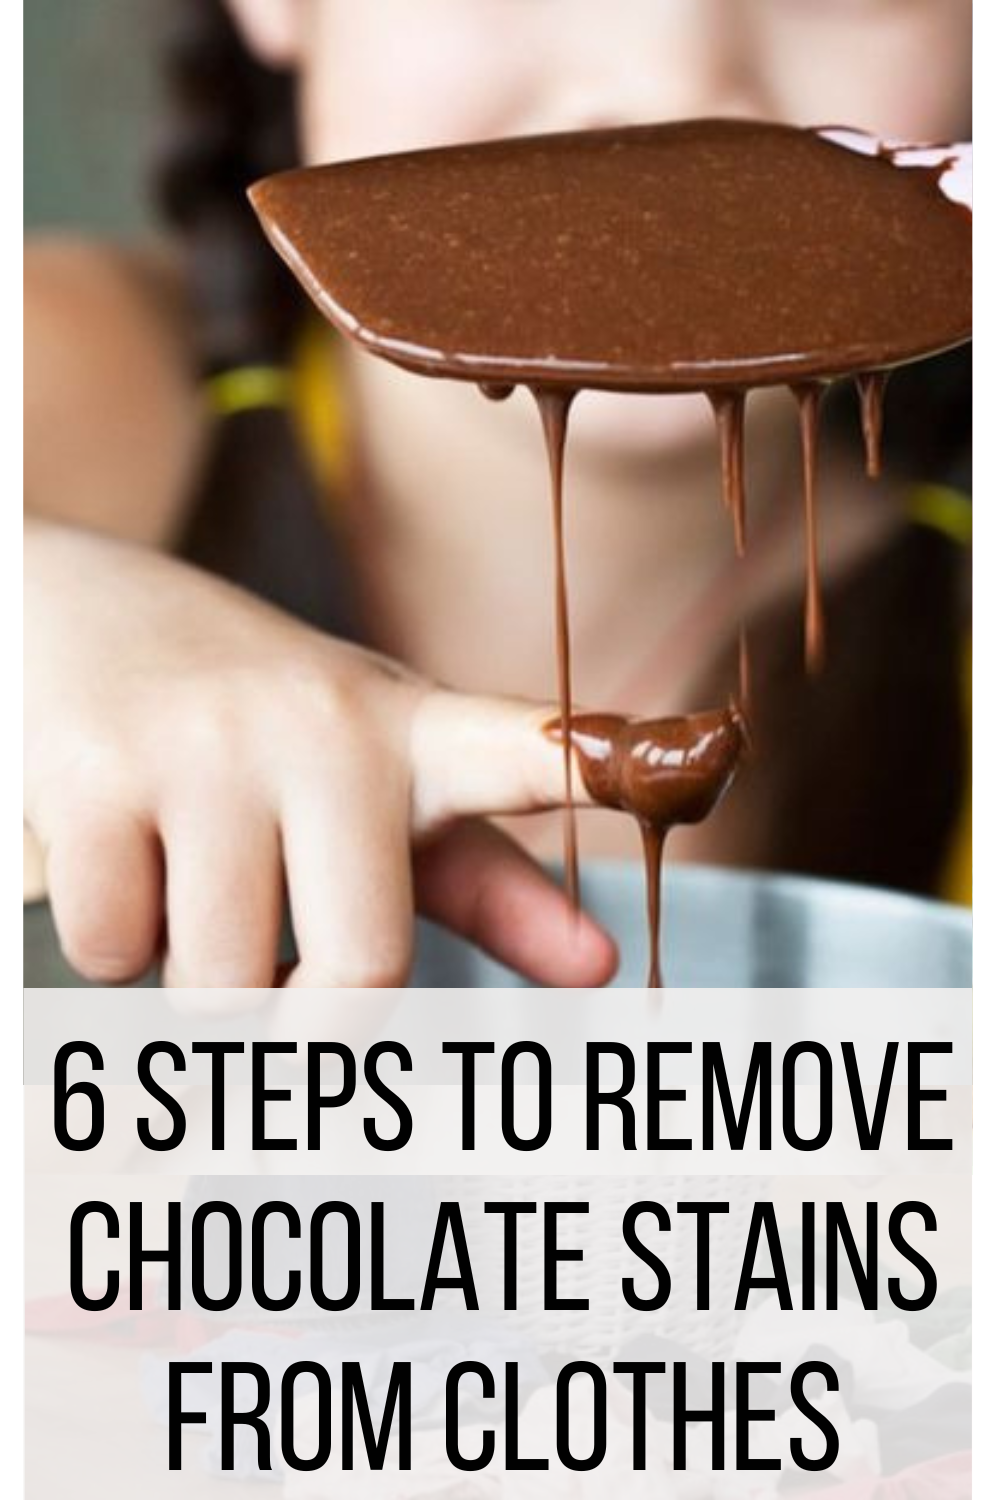 6 Steps to Remove Chocolate Stains from Clothes